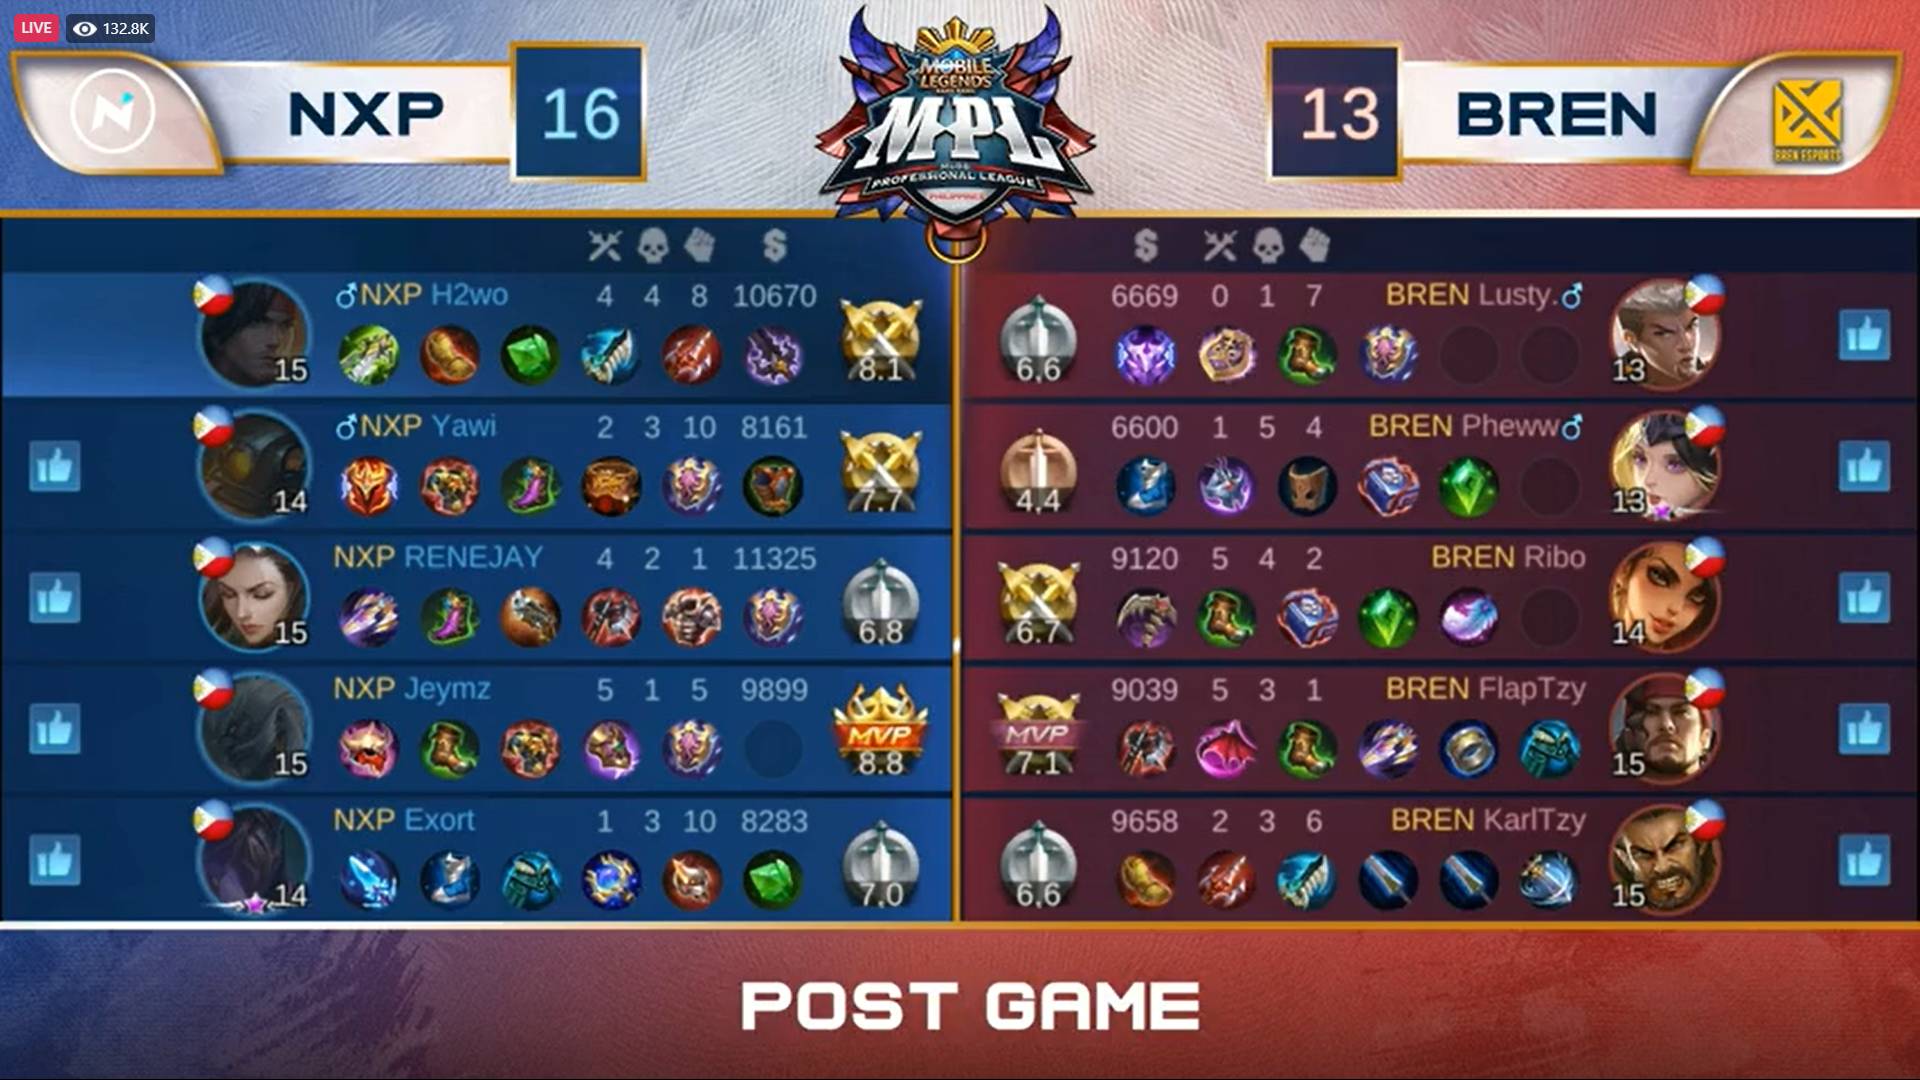 MPL-PH-7-NXP-def-Bren-Game-1 Nexplay drops world champ BREN to 0-2 in MPL-PH after surprise sweep ESports Mobile Legends MPL-PH News  - philippine sports news